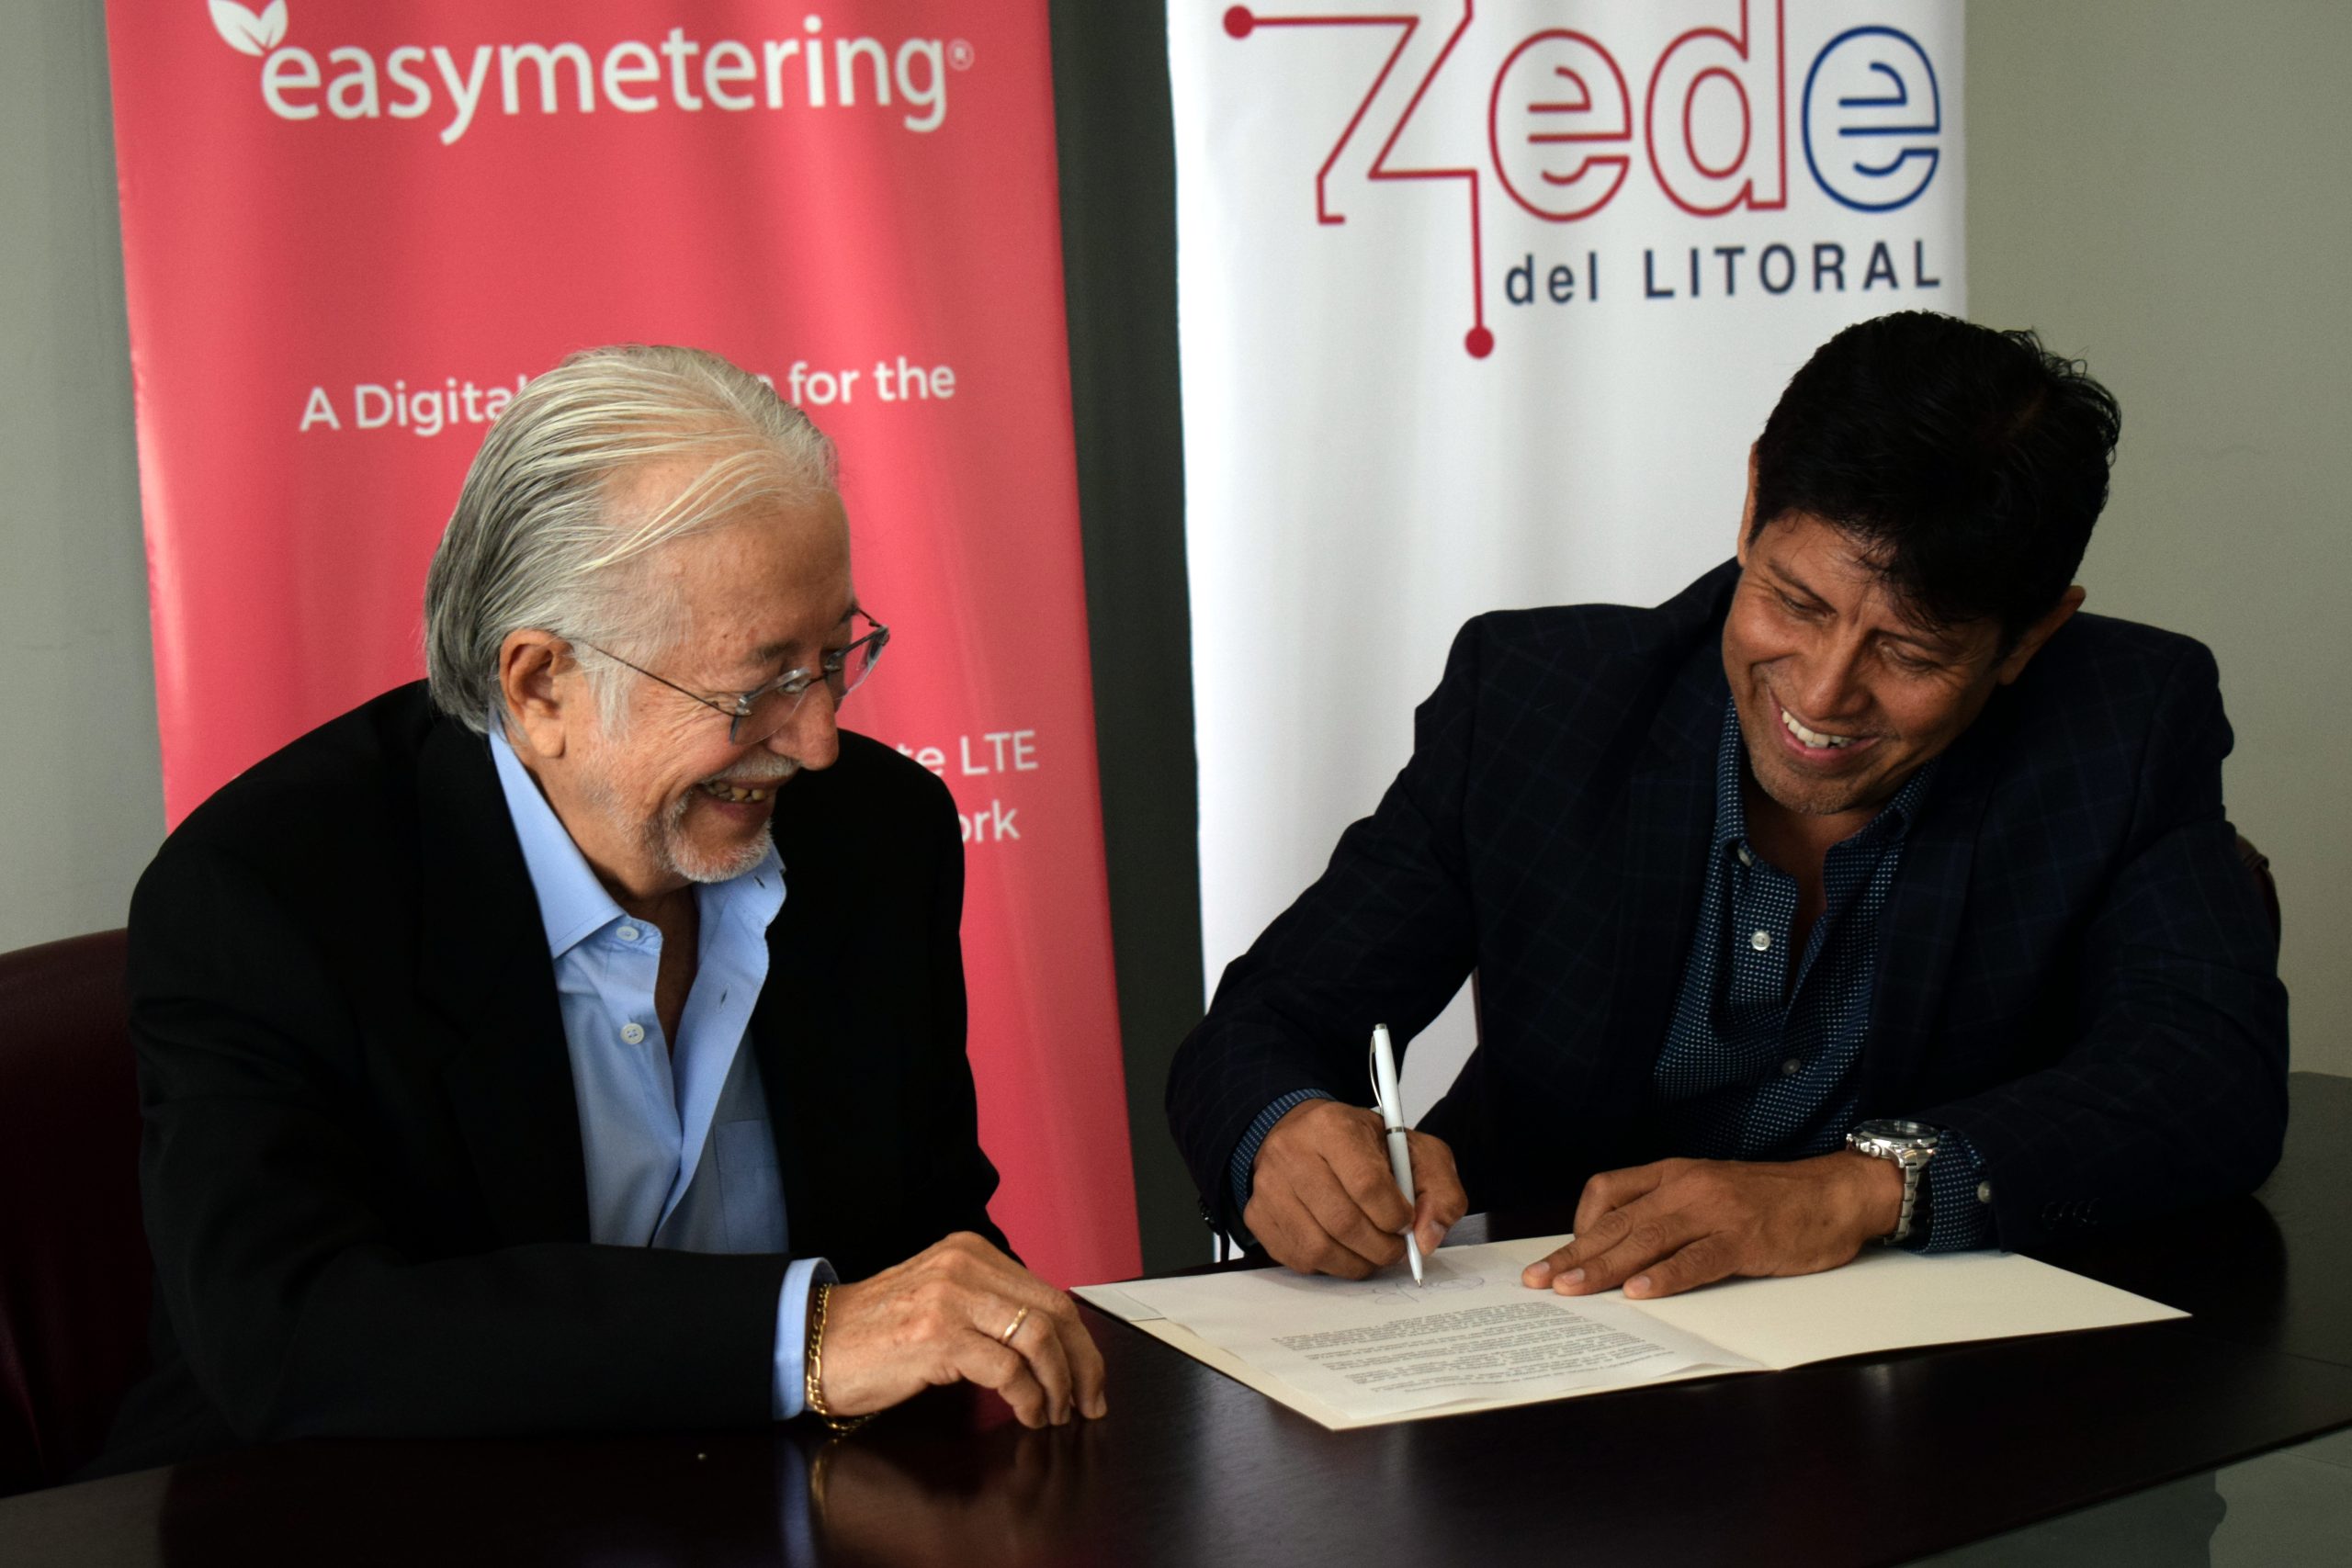 EASYMETERING will be the First Technology Company in ZEDE del Litoral